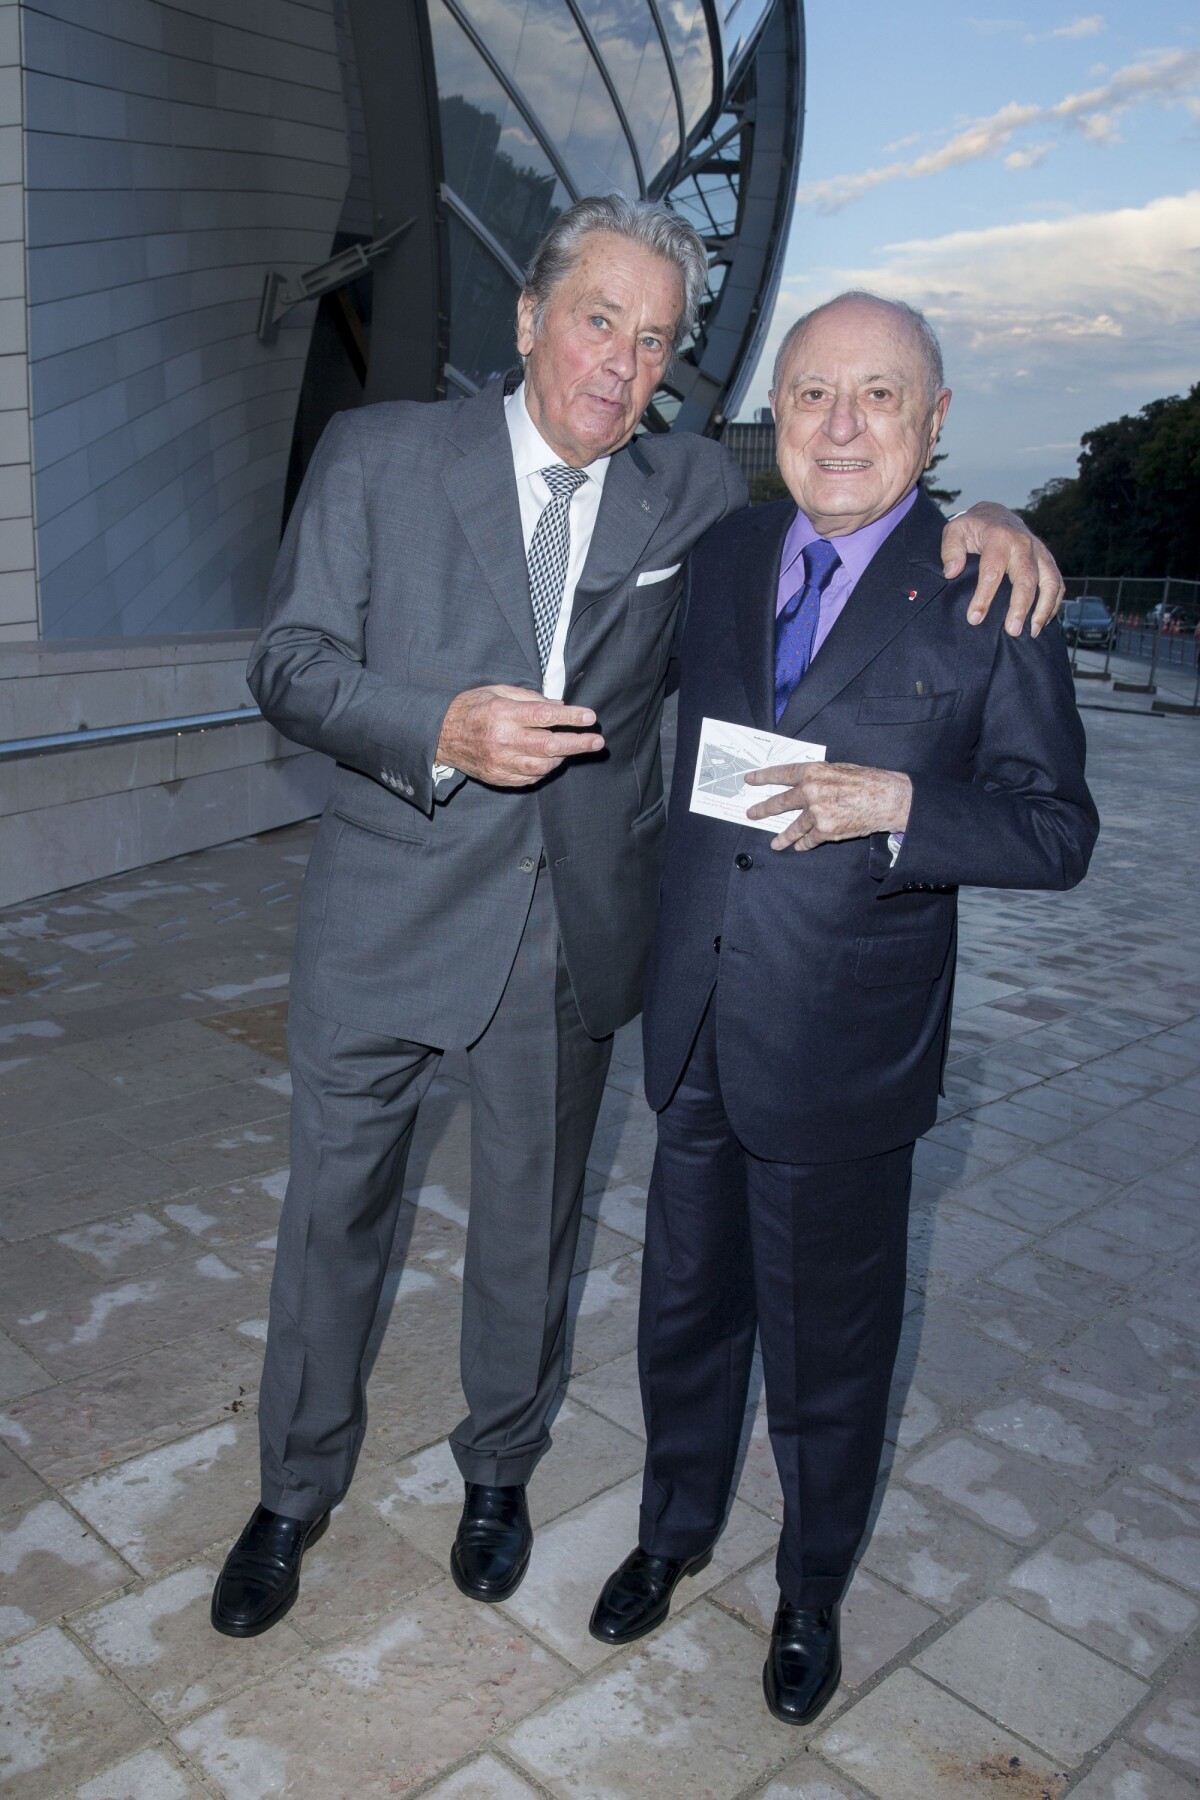 Alain Delon and Pierre Berge arriving at the Louis Vuitton art